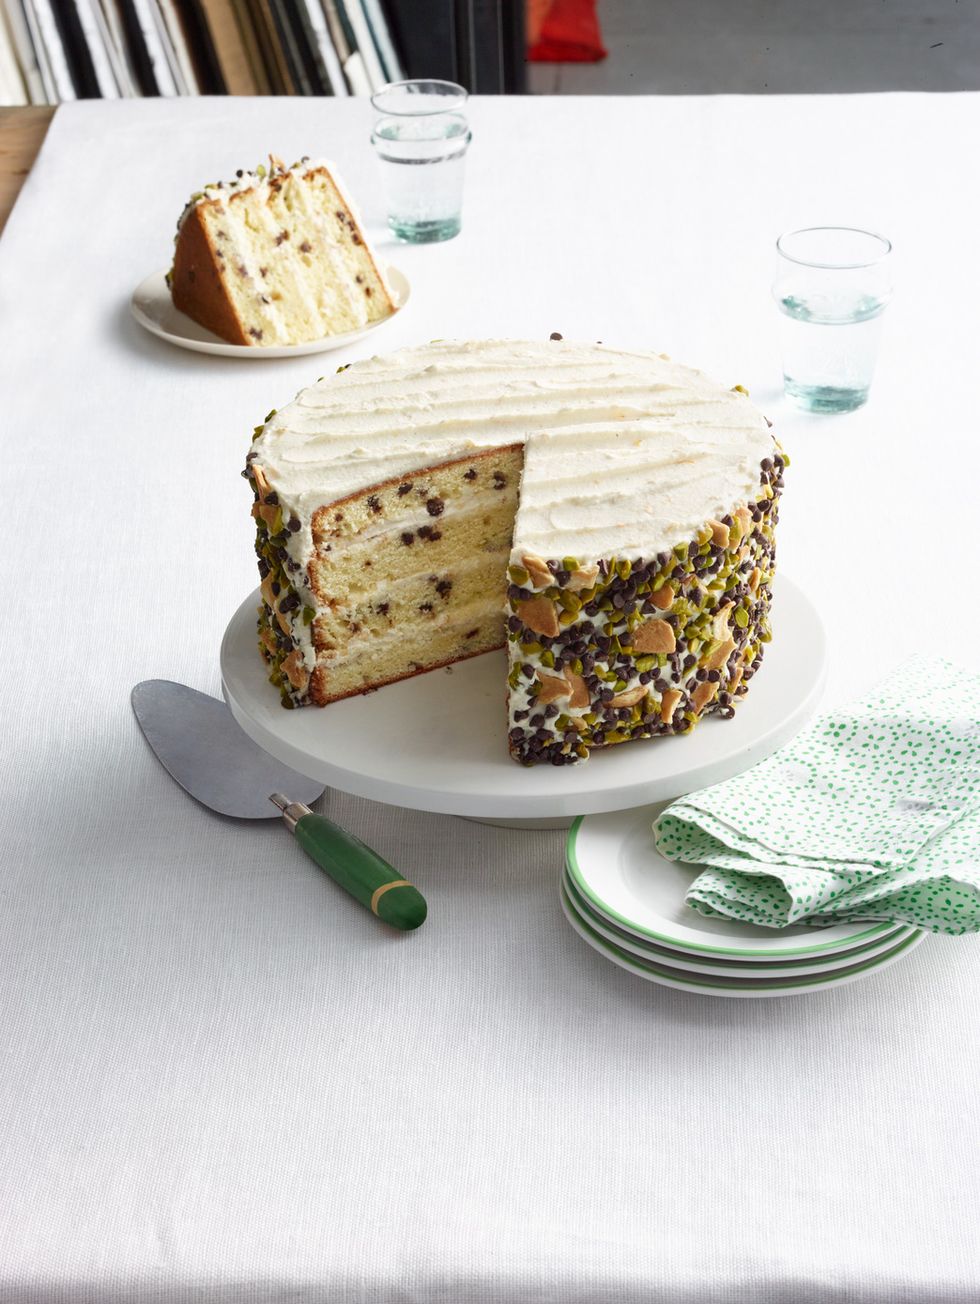 <p>This four layer cake is unique and maintains the traditional cannoli flavor.</p> <p><strong>Recipe:</strong> <a href="cannoli-cake-recipe-wdy0315" target="_blank"><strong>Cannoli Cake</strong></a></p>